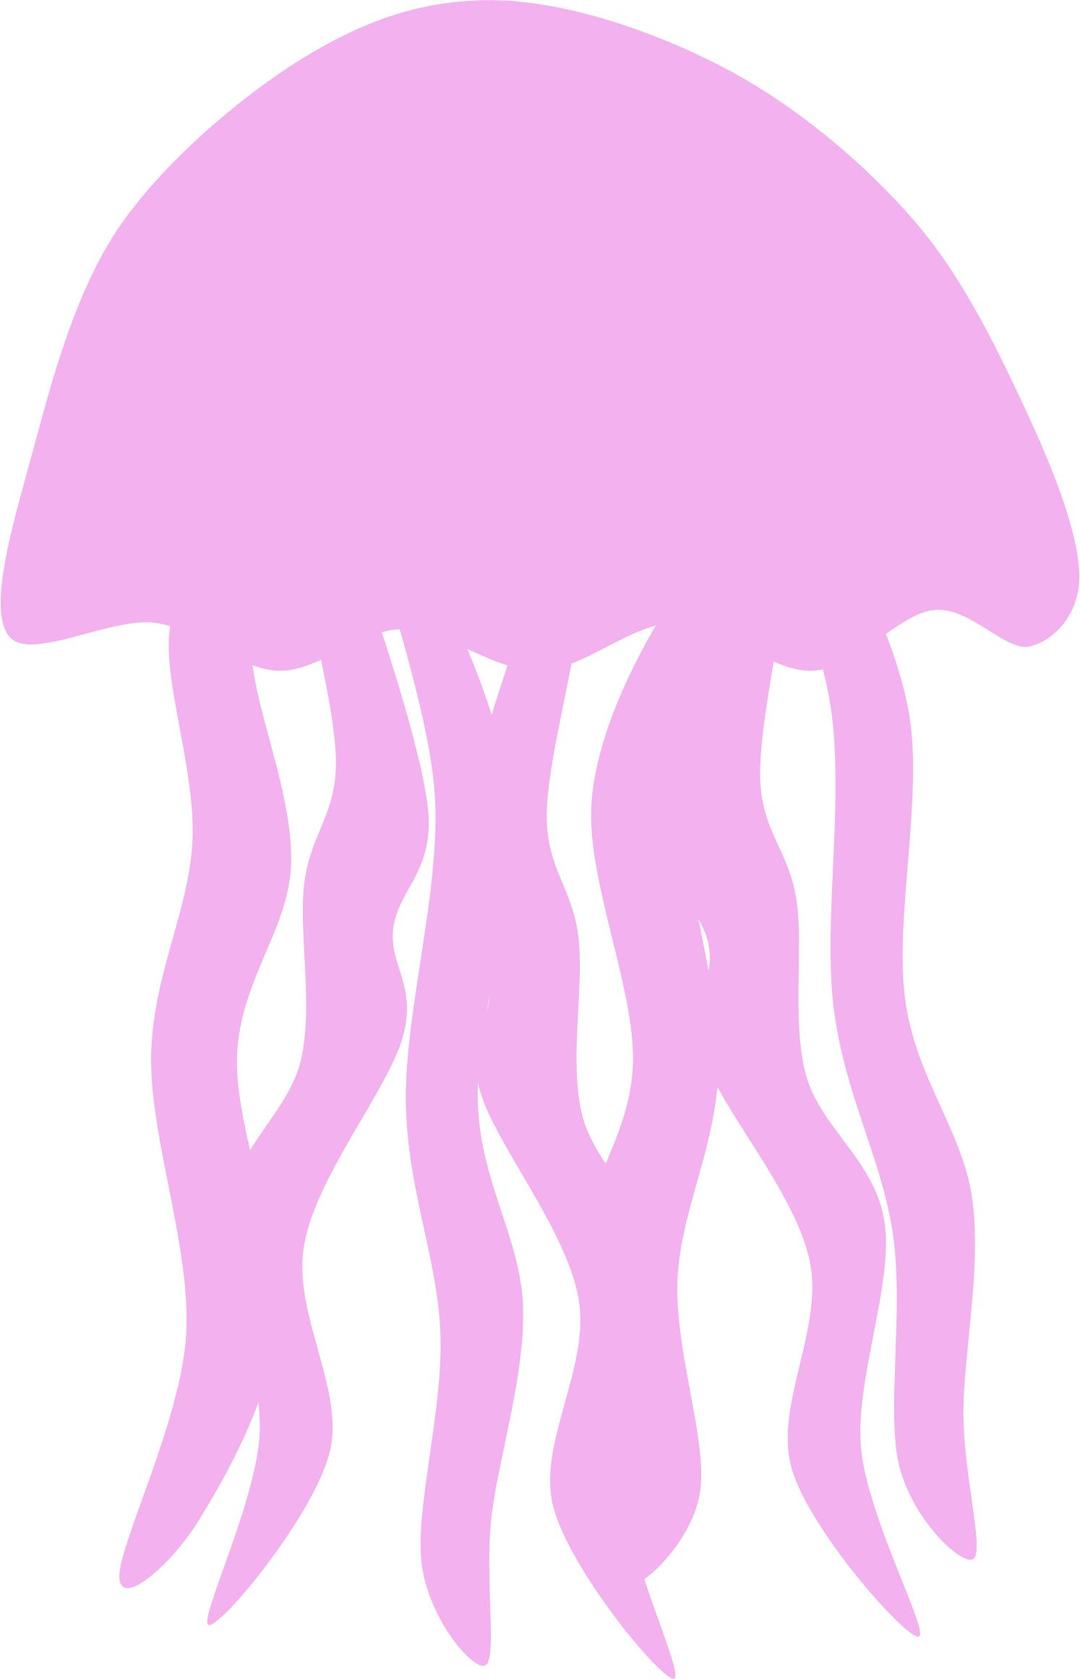 Jellyfish Silhouette png transparent